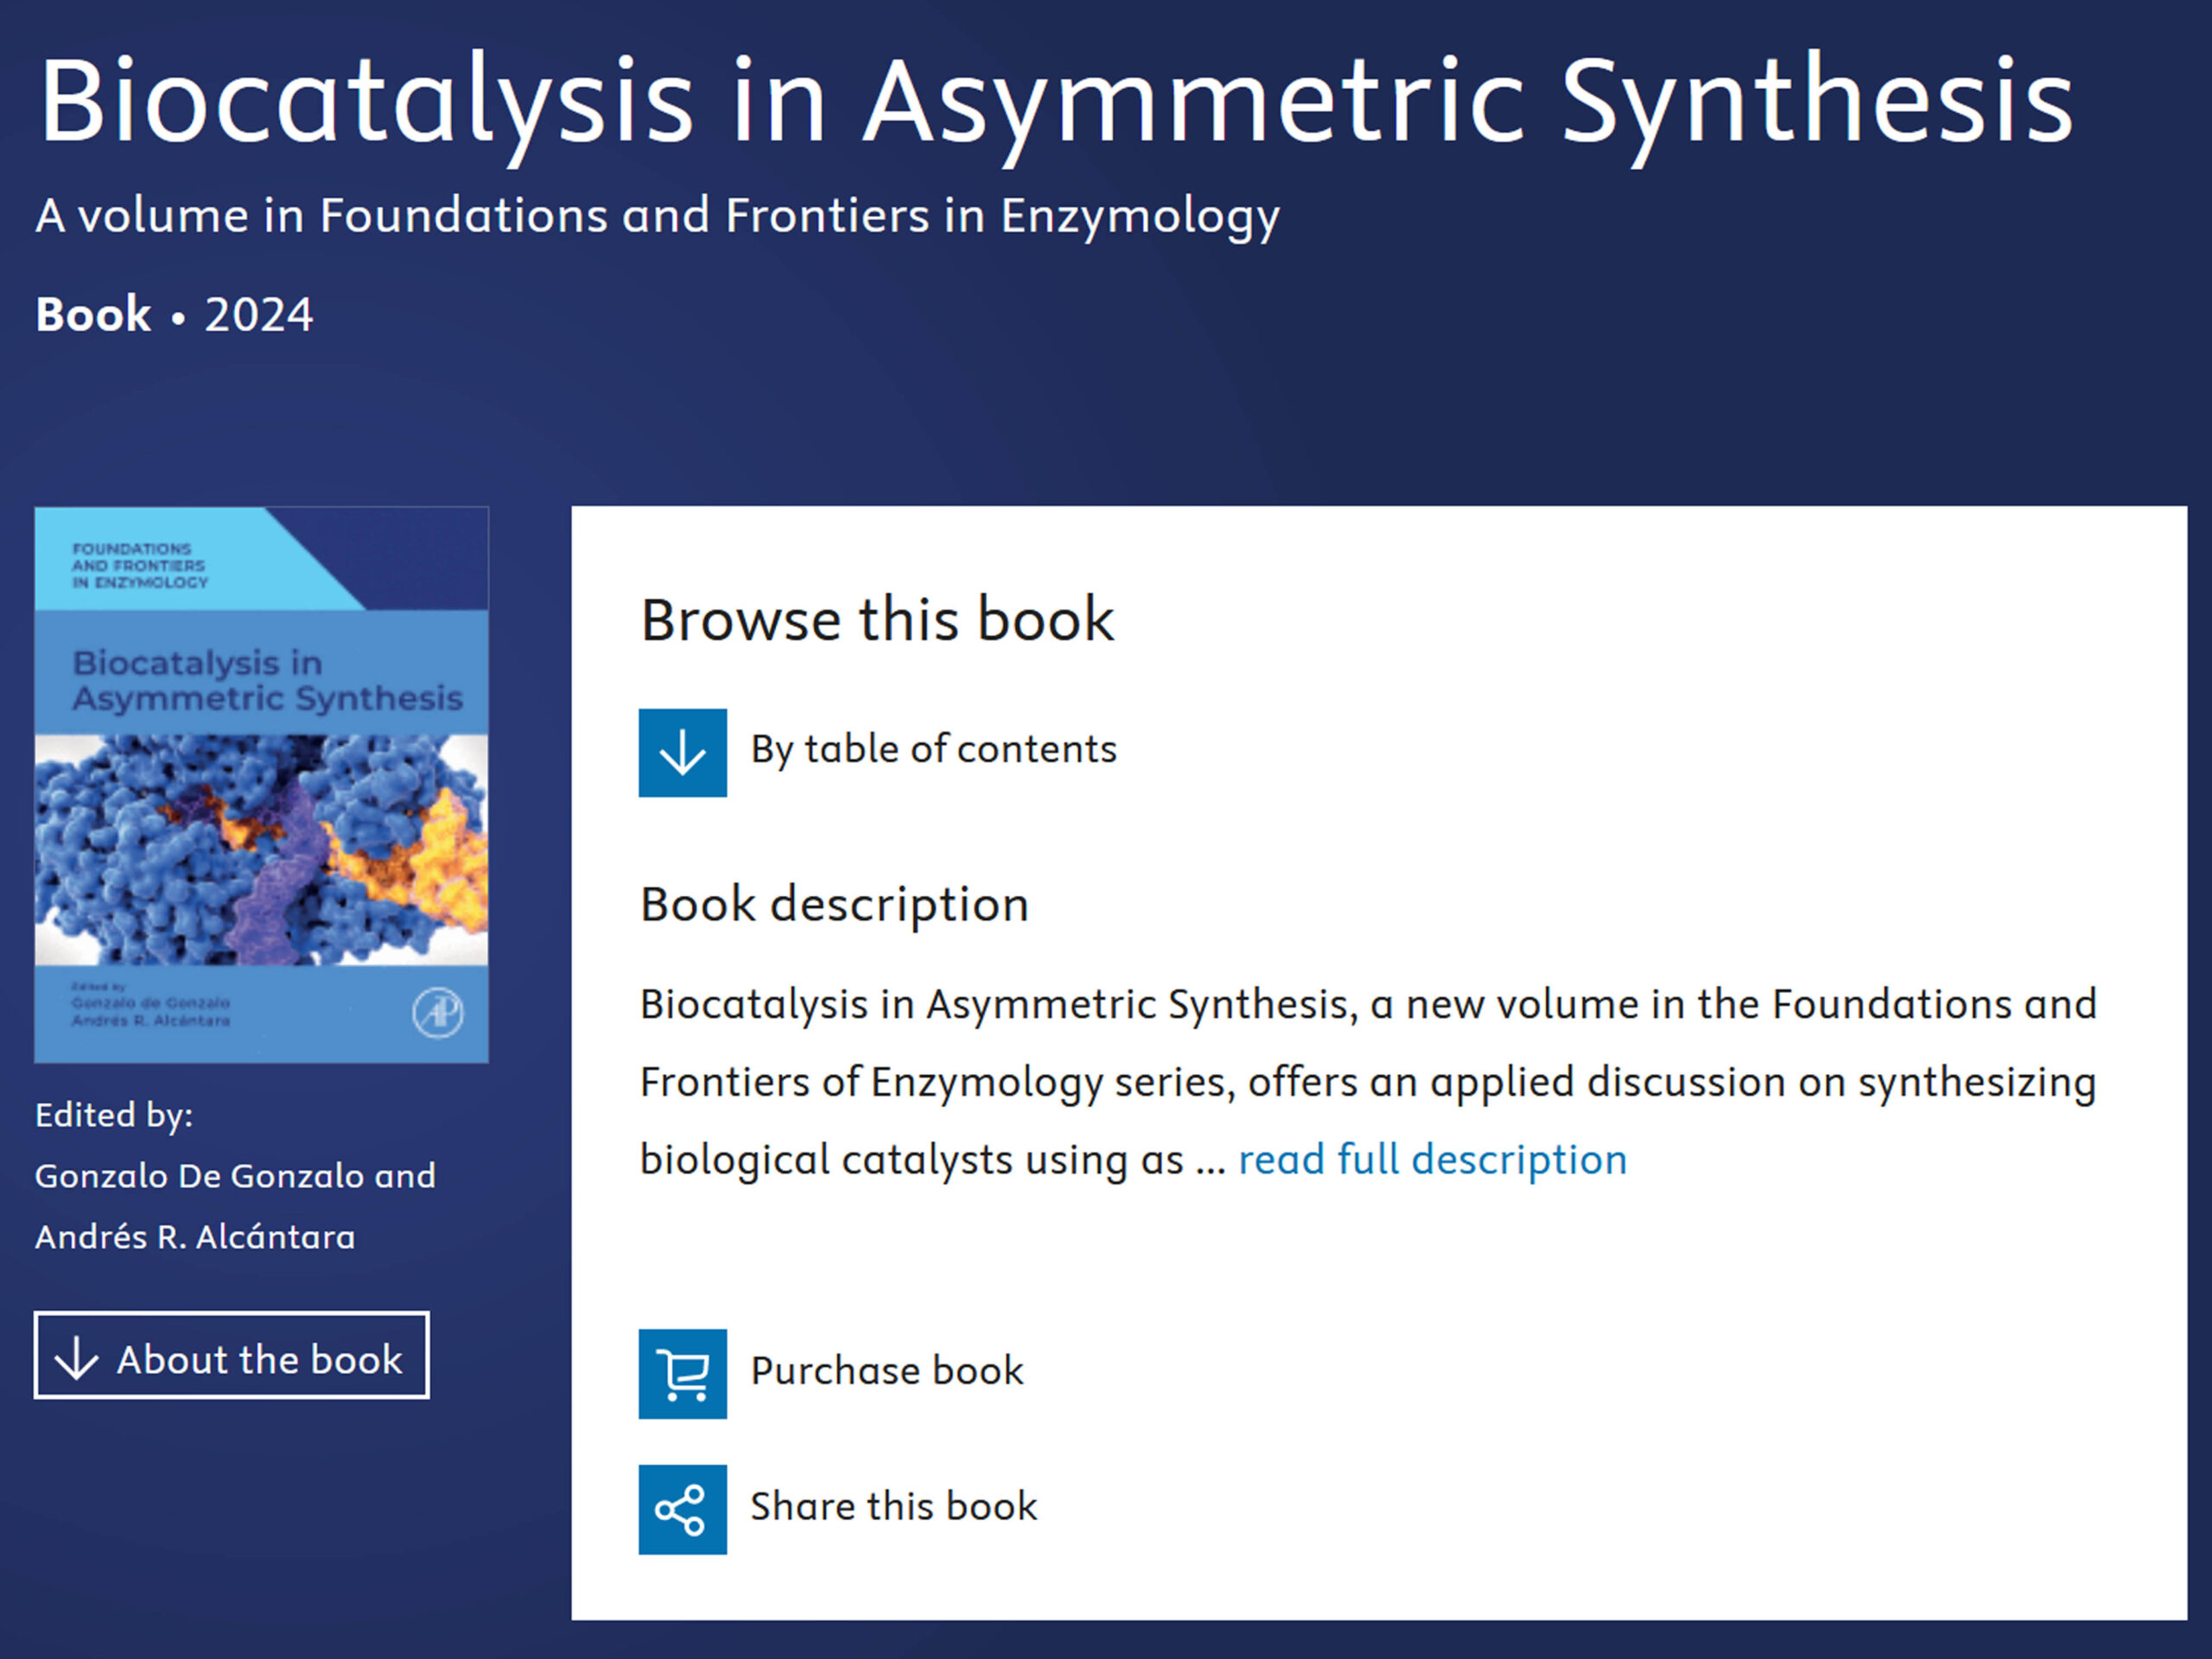 „Biocatalysis in asymetric synthesis“ Book published